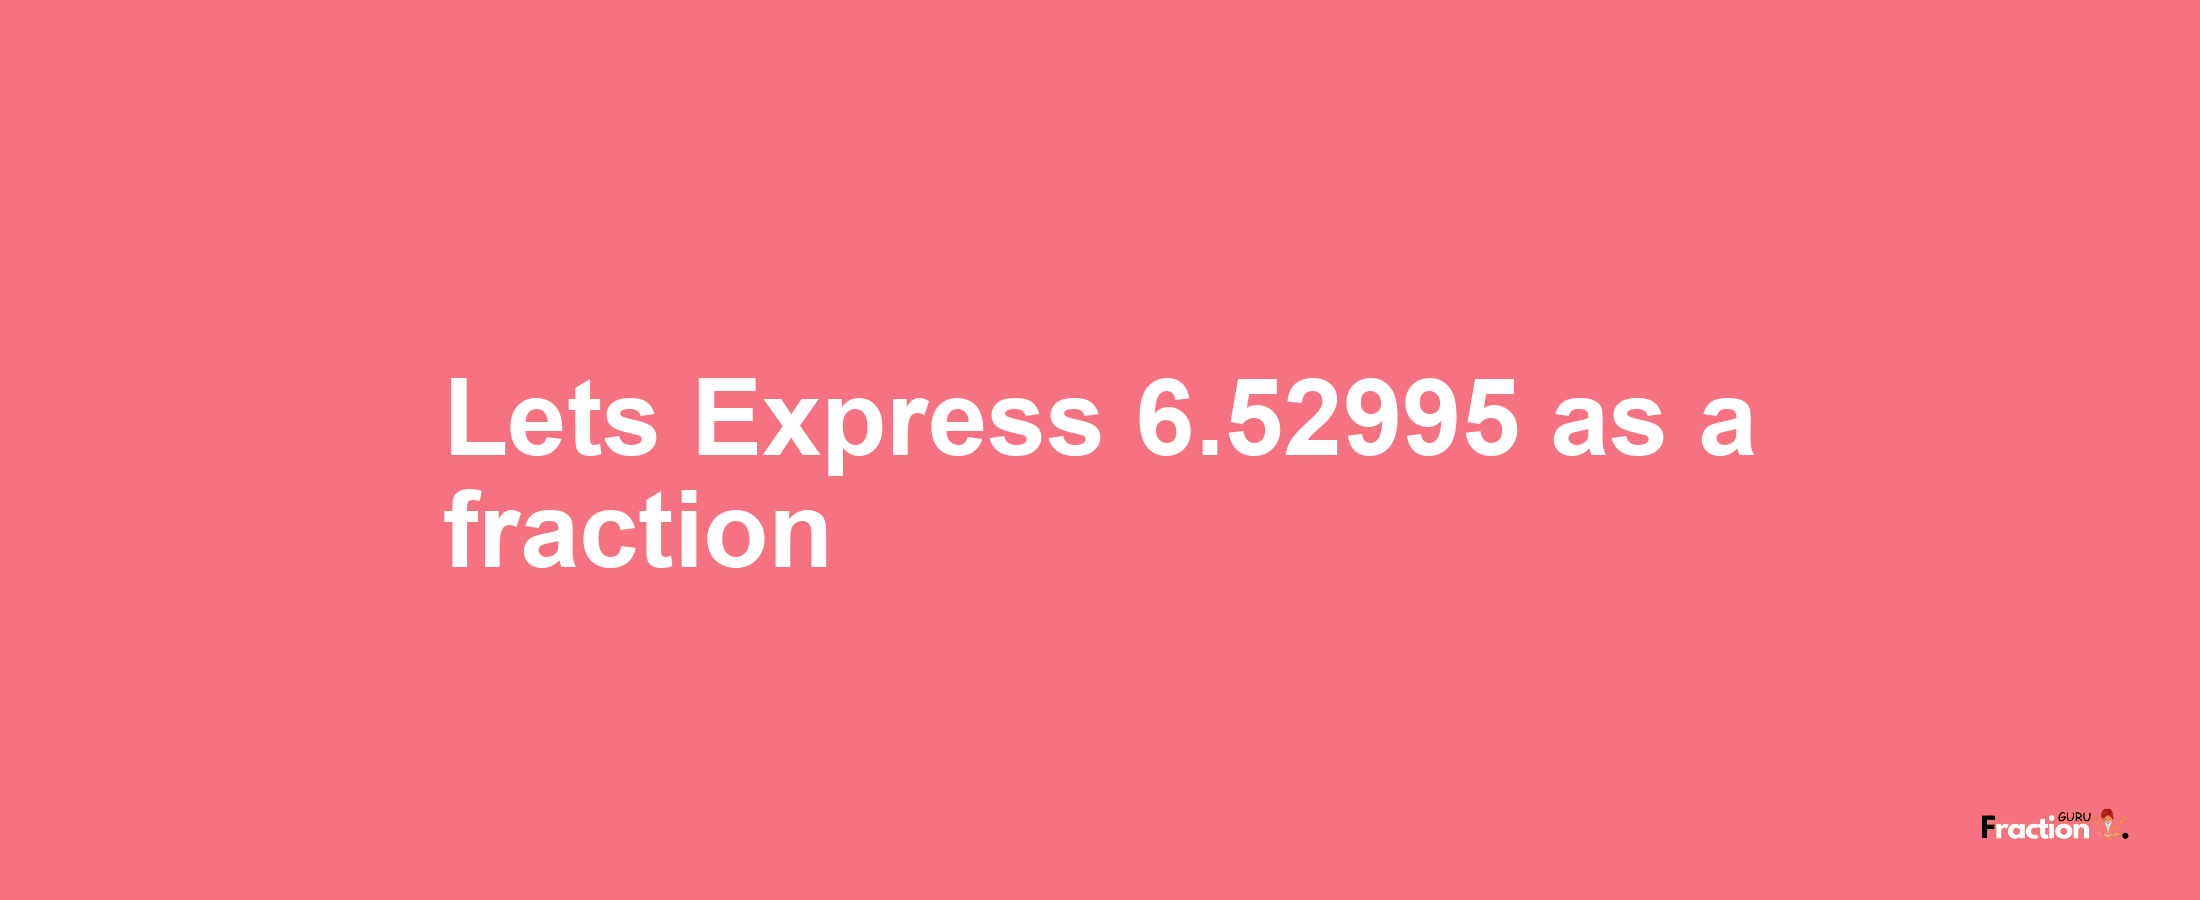 Lets Express 6.52995 as afraction